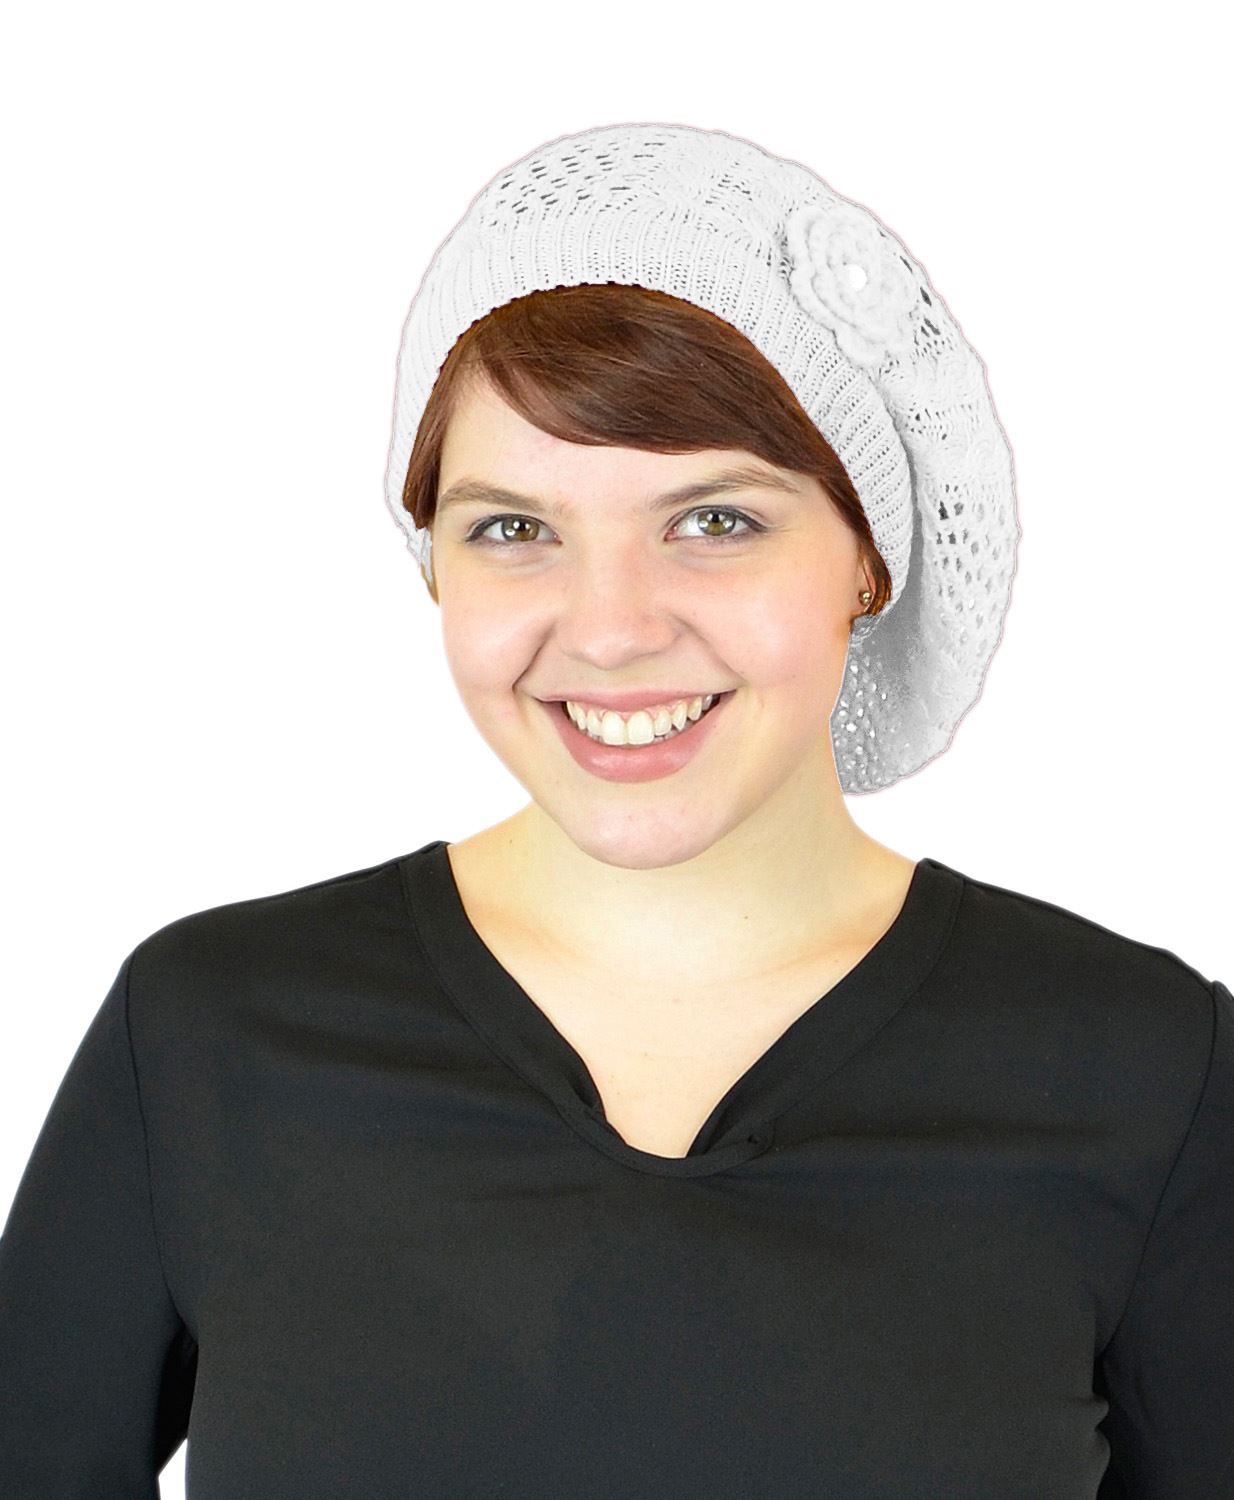 Belle Donne Women's Mesh Crocheted Flower Accented Slouchy Beret Hat- White